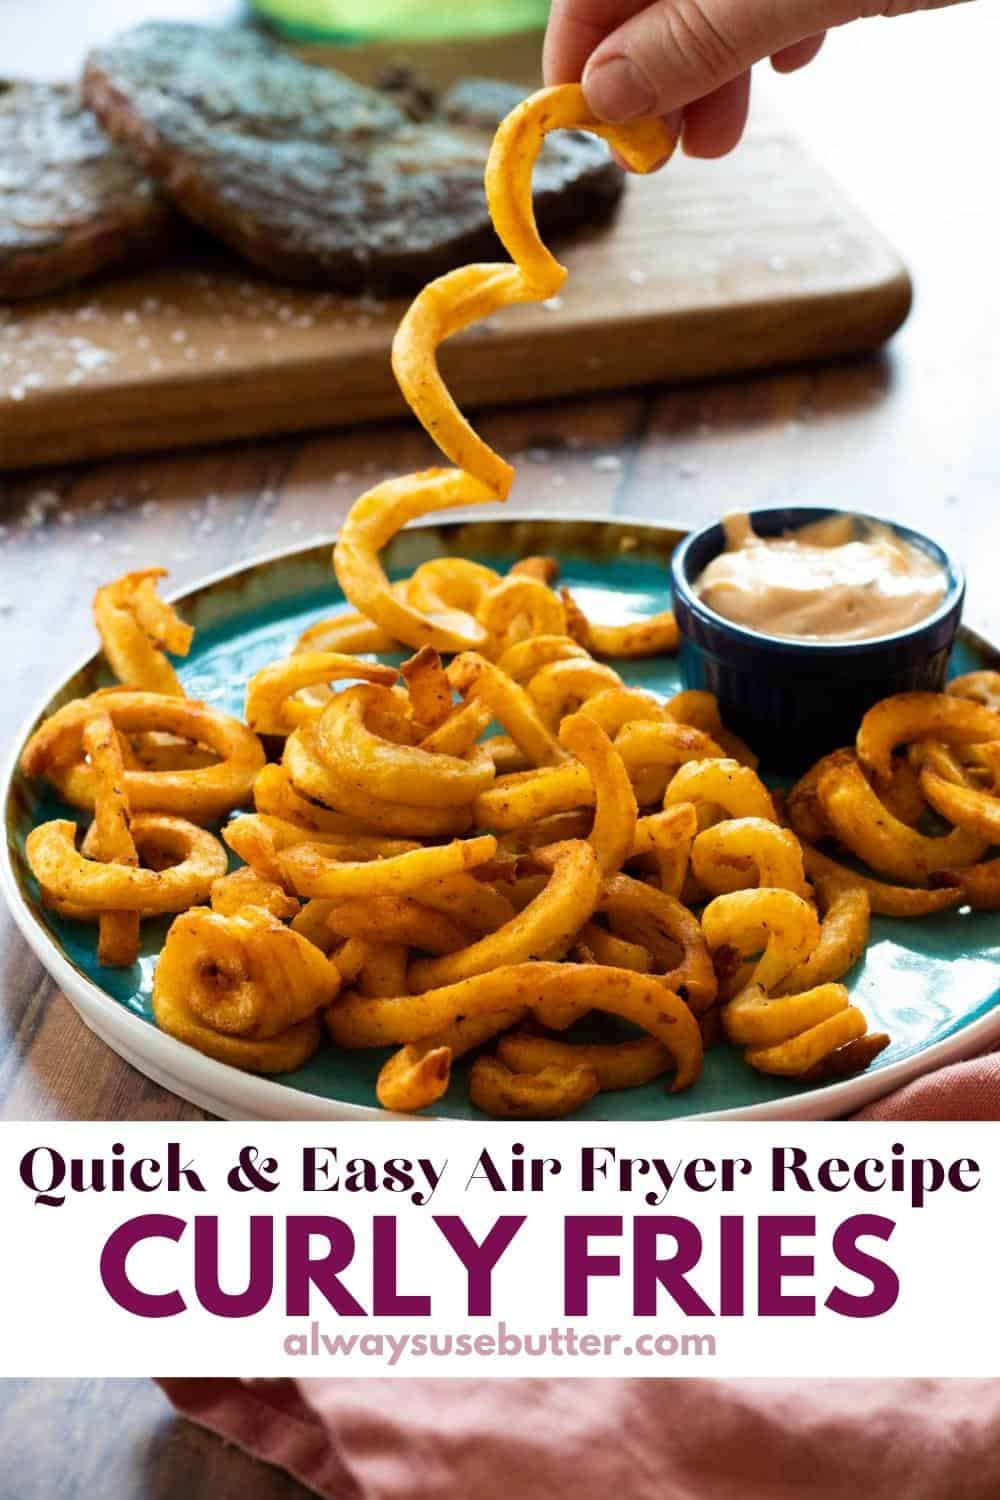 Frozen Curly Fries in Air Fryer - always use butter